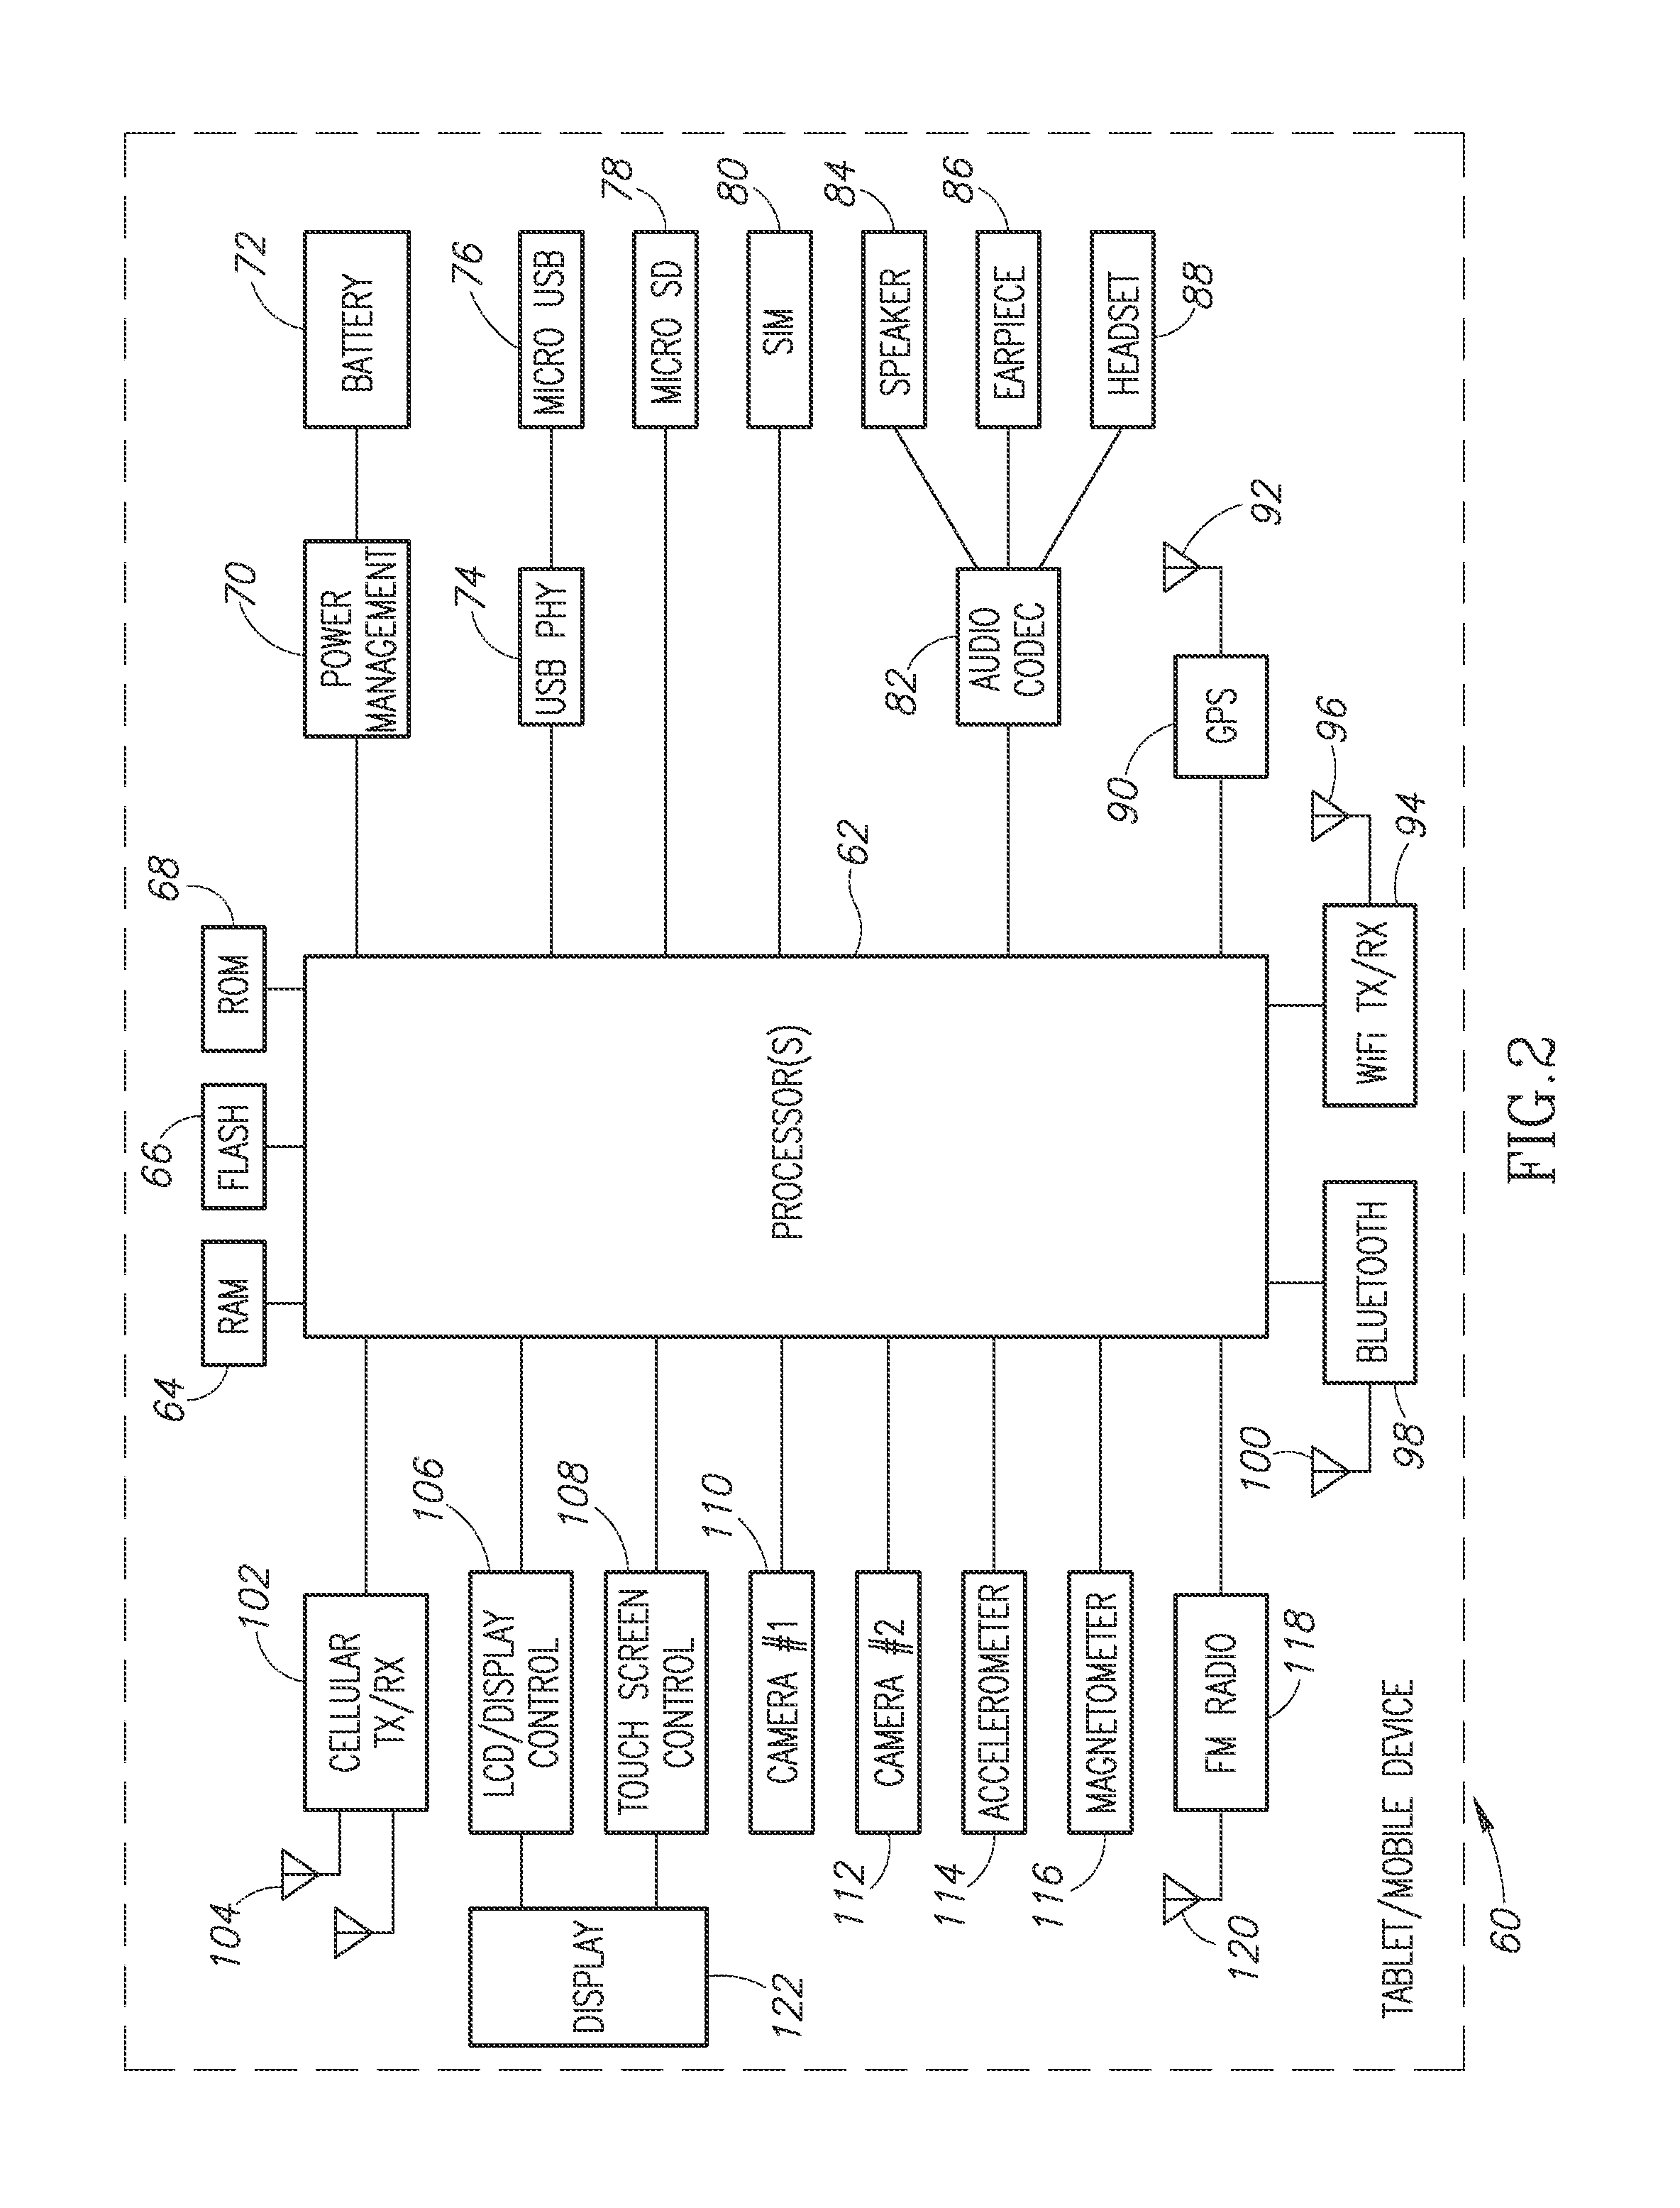 System and method of distributed event based digital image collection, organization and sharing